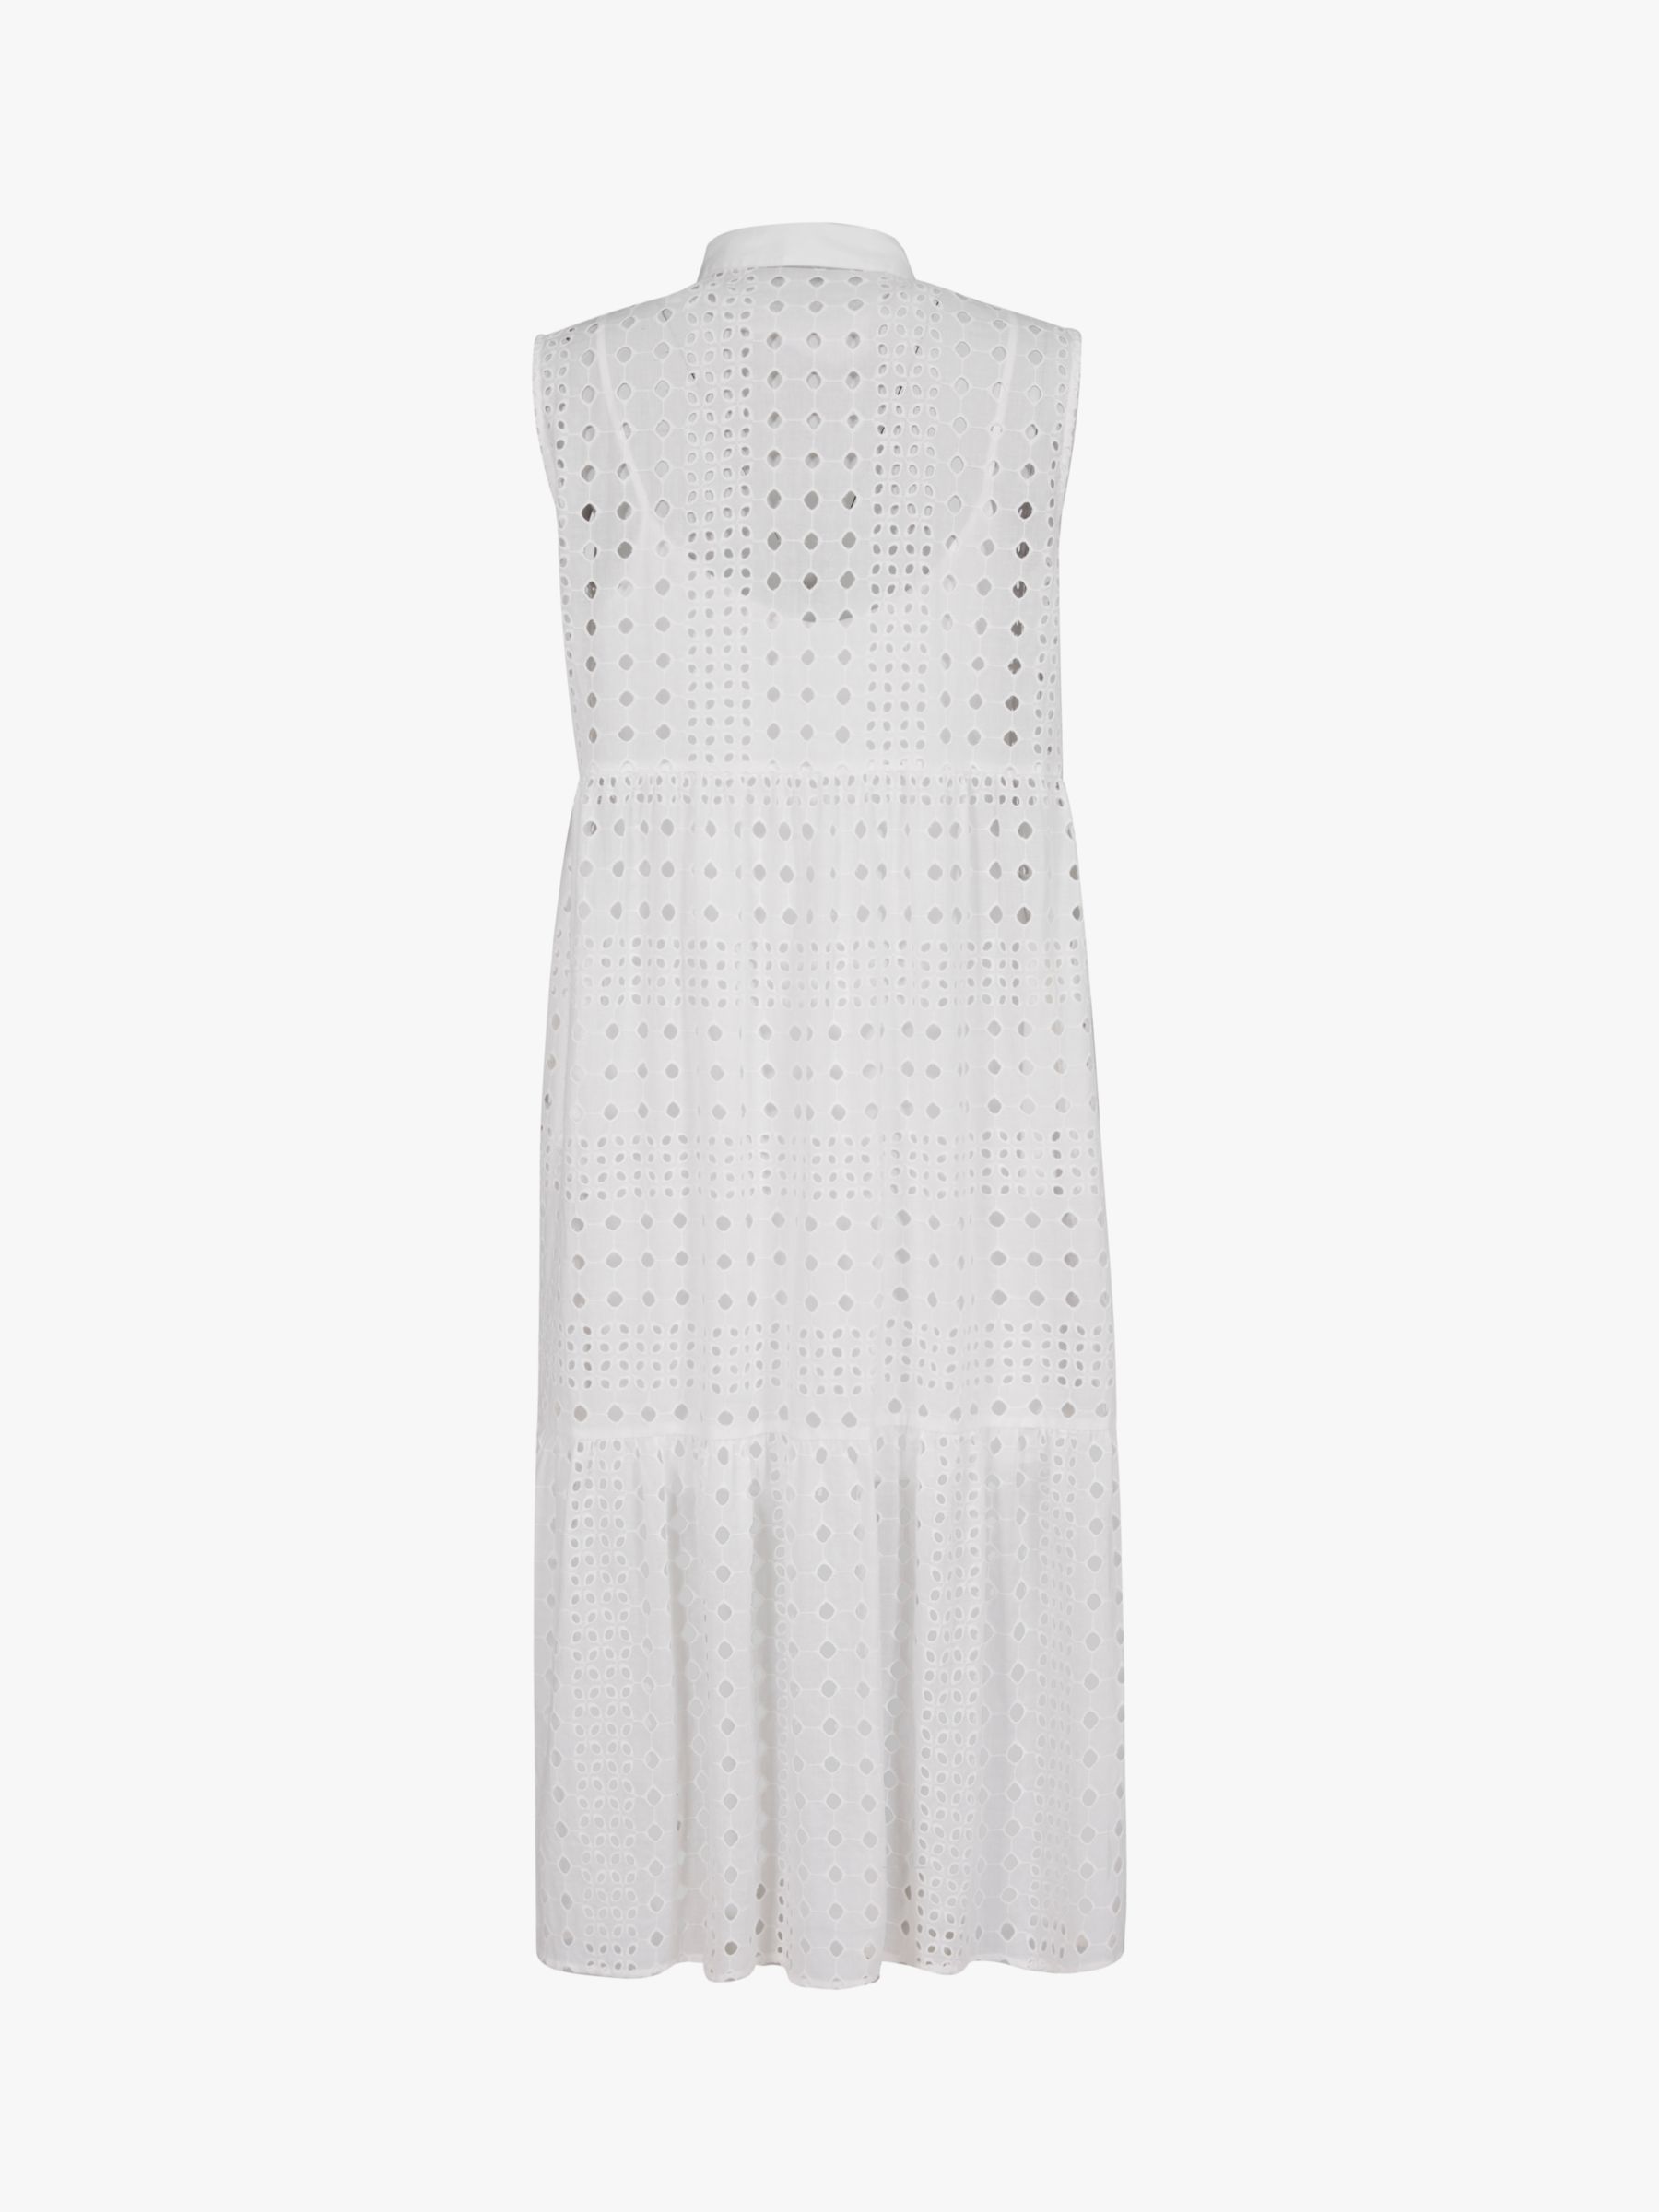 Buy Celtic & Co. Cotton Broderie Sleeveless Maxi Dress, White Online at johnlewis.com